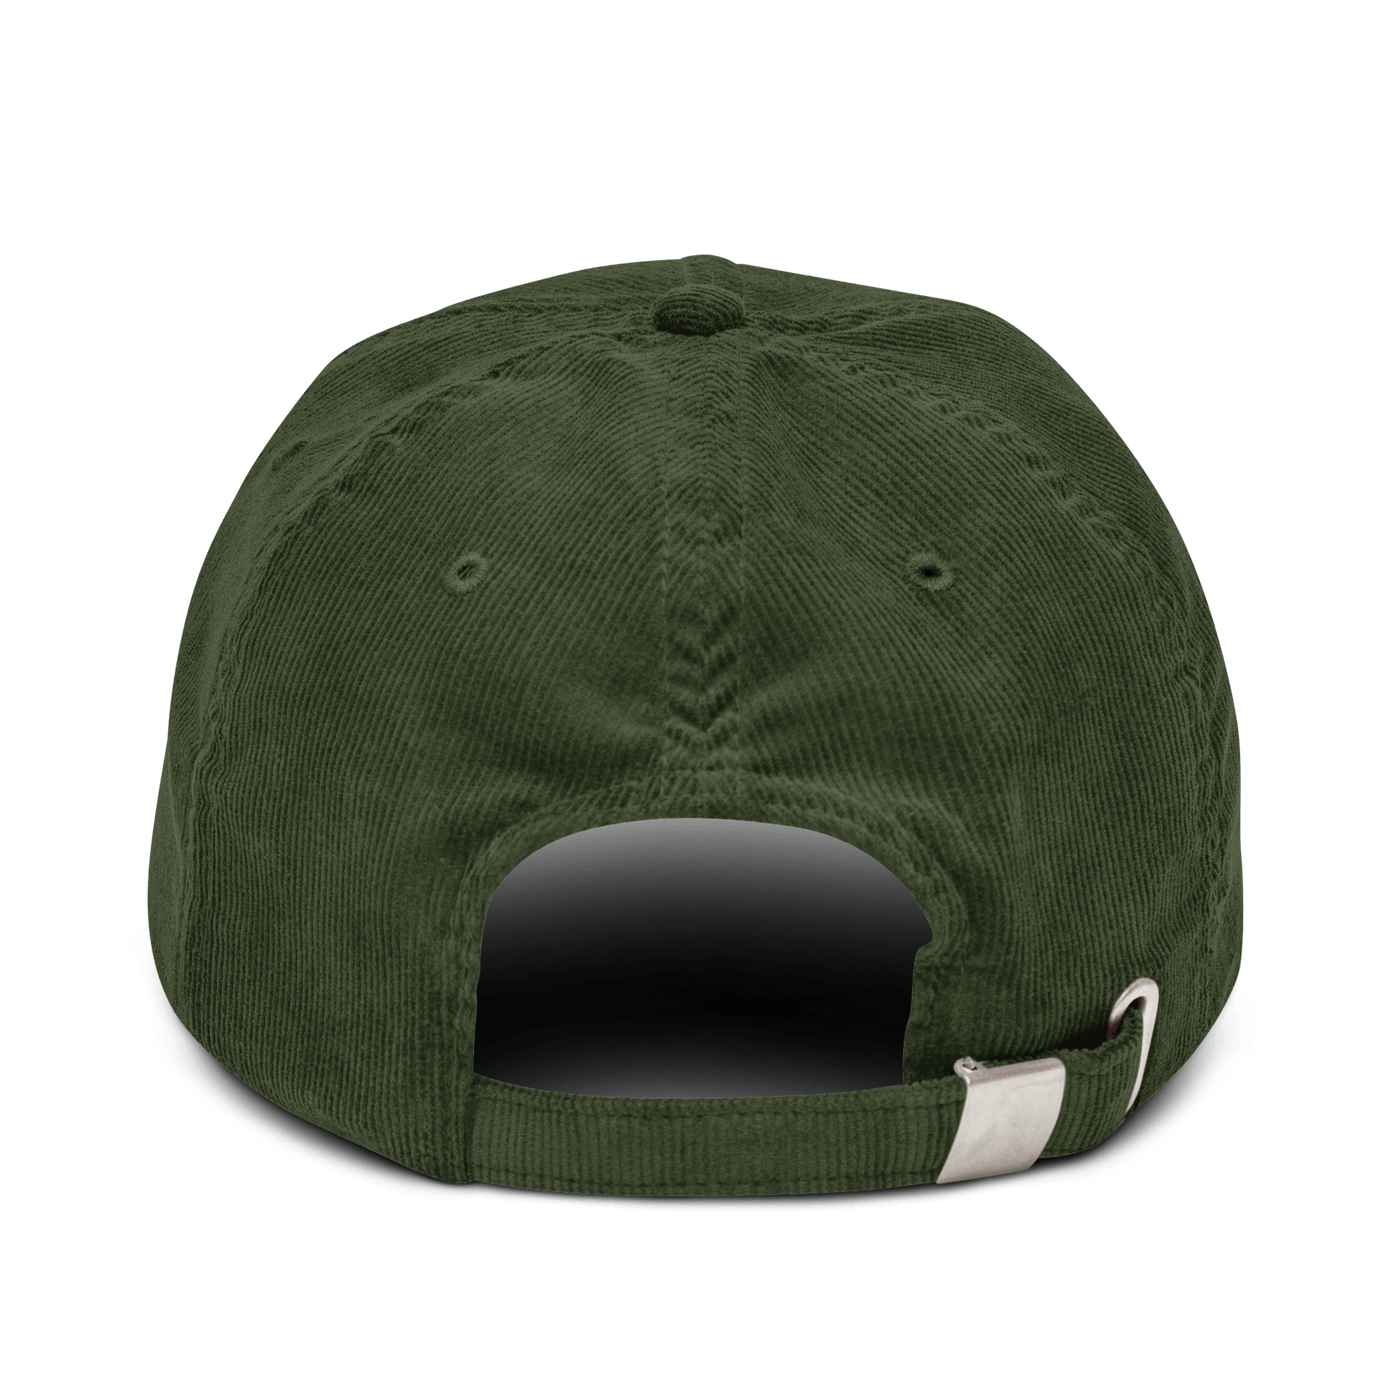 Future Dilf Corduroy Hat - Dark Olive - - Just Another Cap Store